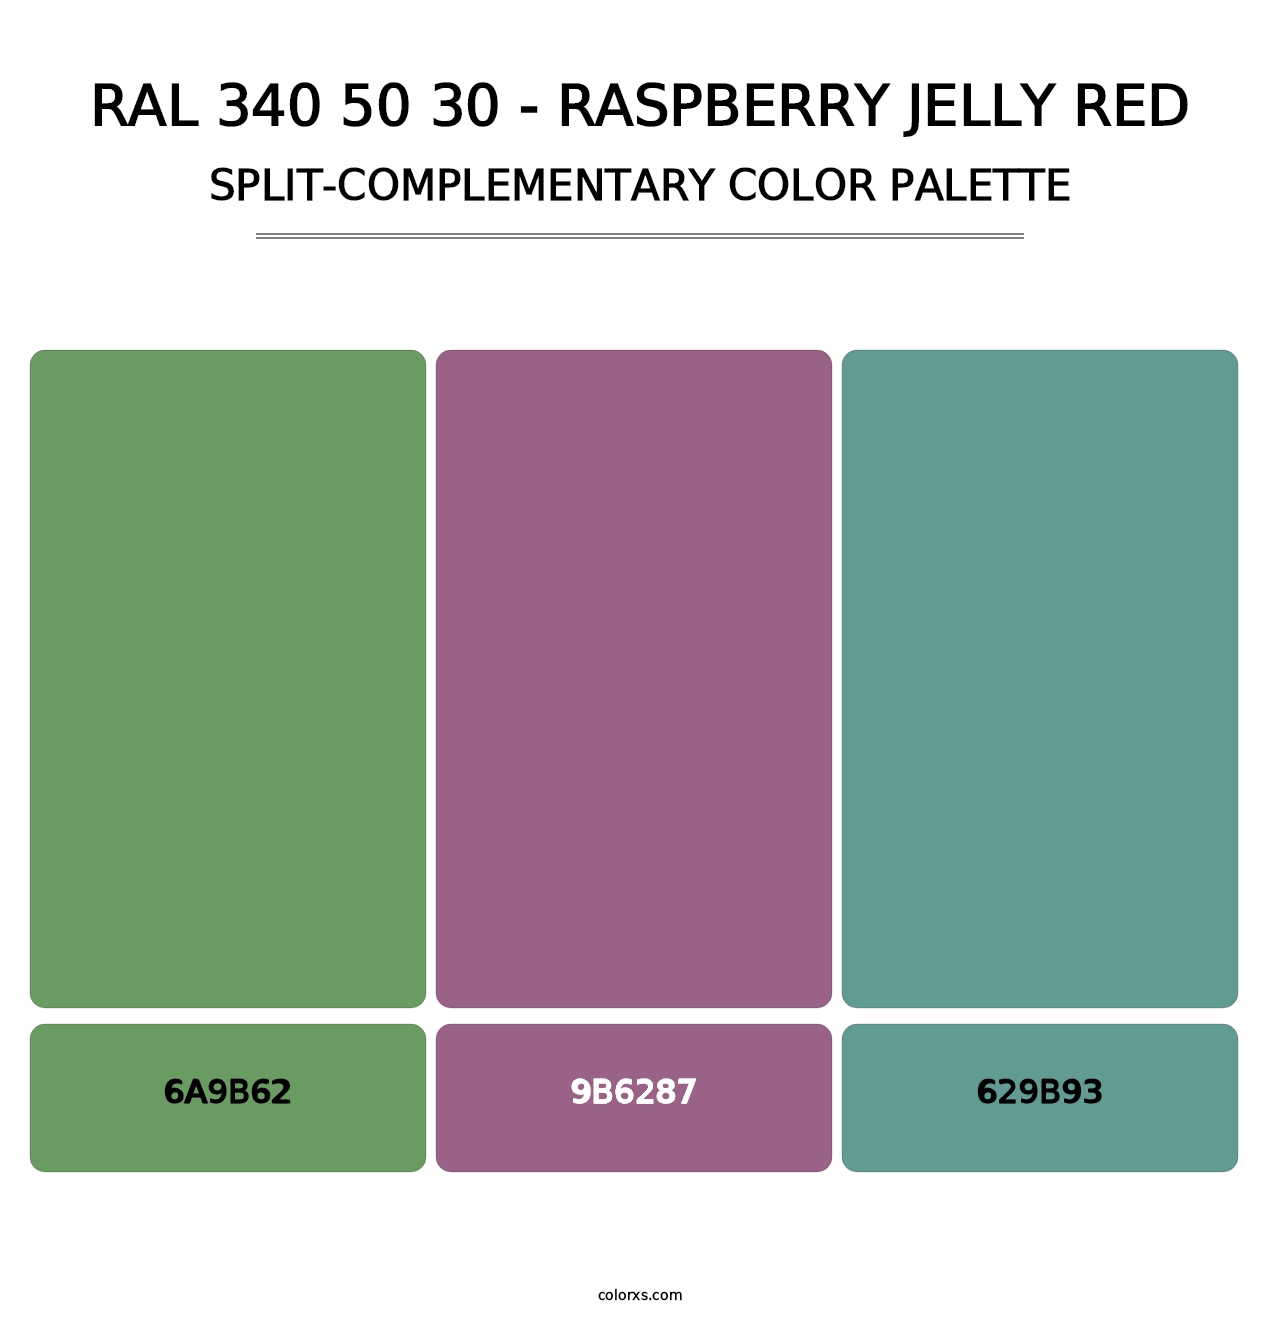 RAL 340 50 30 - Raspberry Jelly Red - Split-Complementary Color Palette